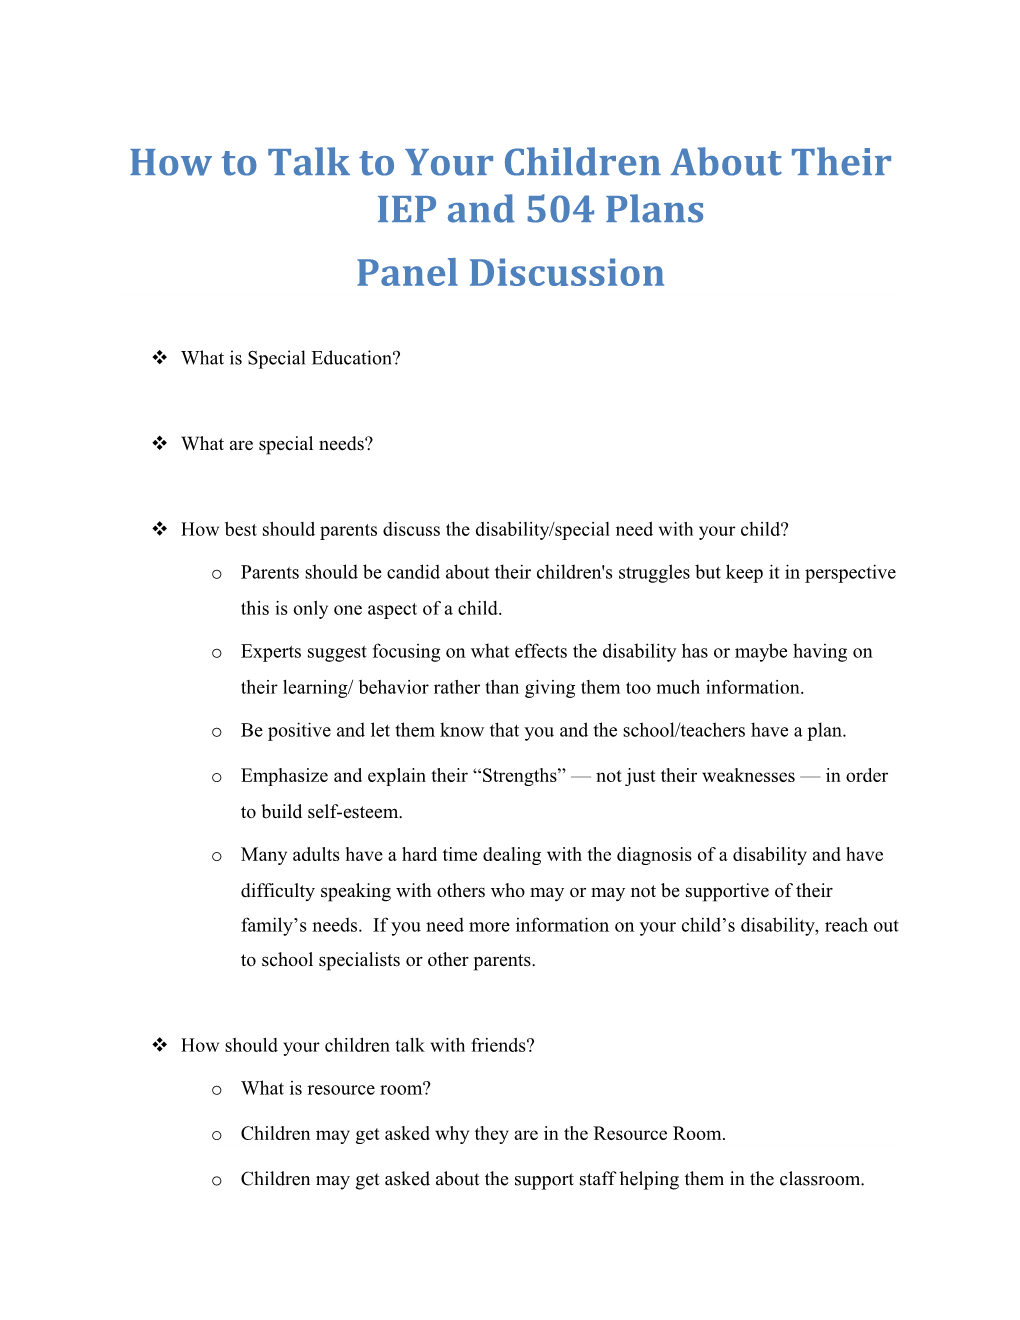 How to Talk to Your Children About Their IEP and 504 Plans